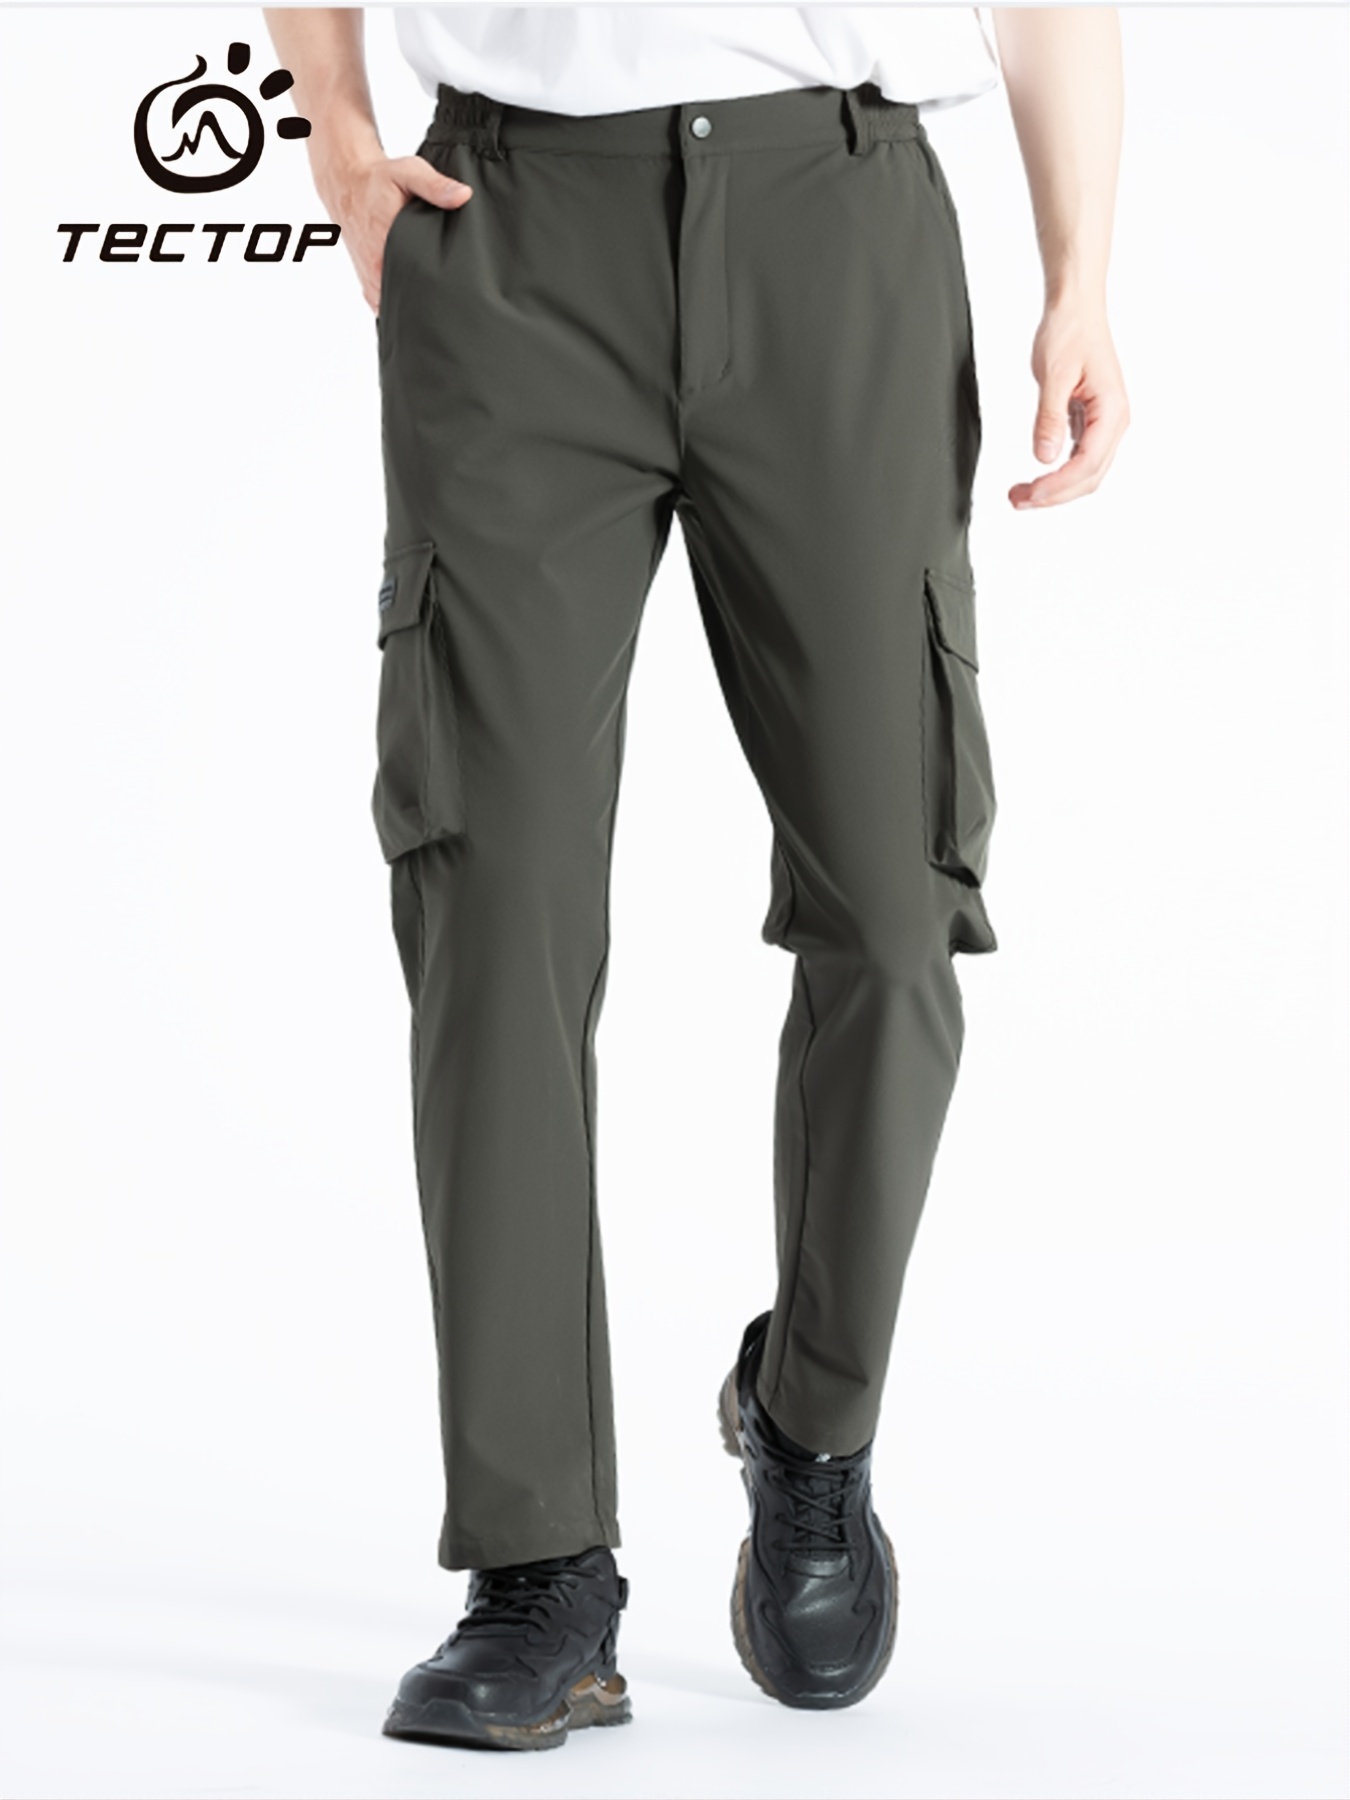 Men's Business Casual Trousers: Tectop's Windproof Hiking Pants for Comfort  & Style - Army Green